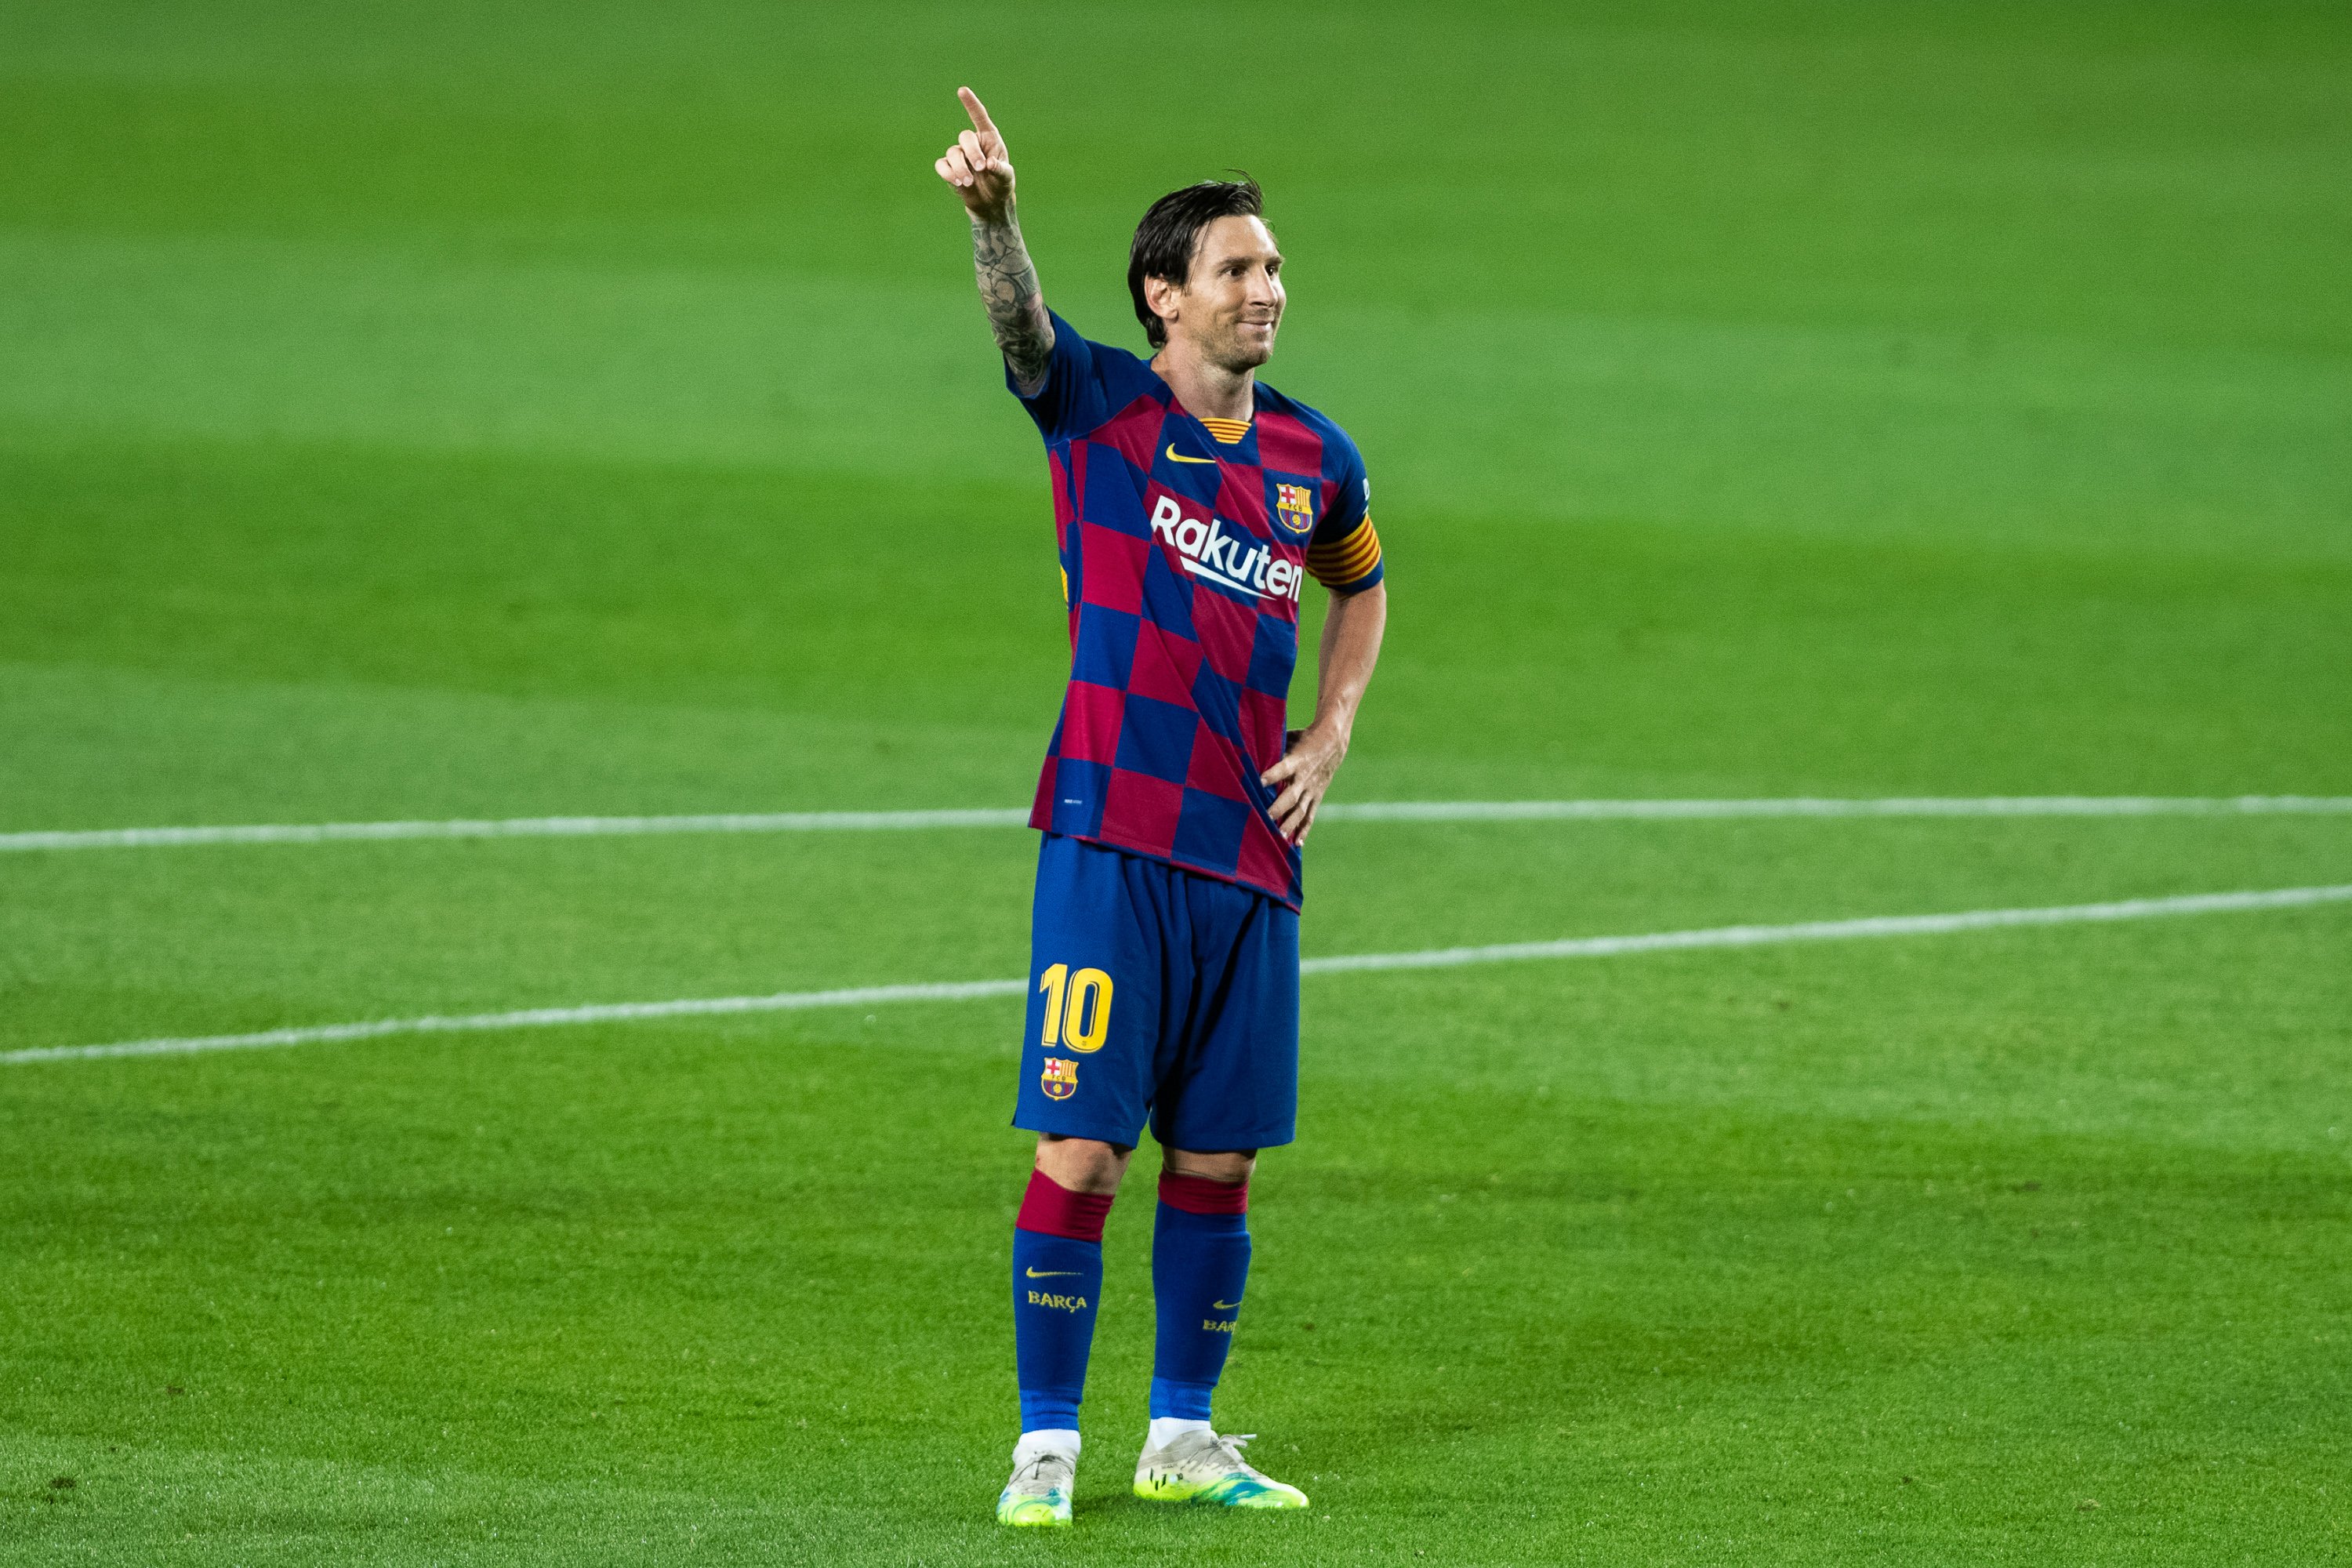 Messi: "I'm staying at Barça. I'd never go to court against my lifetime club"